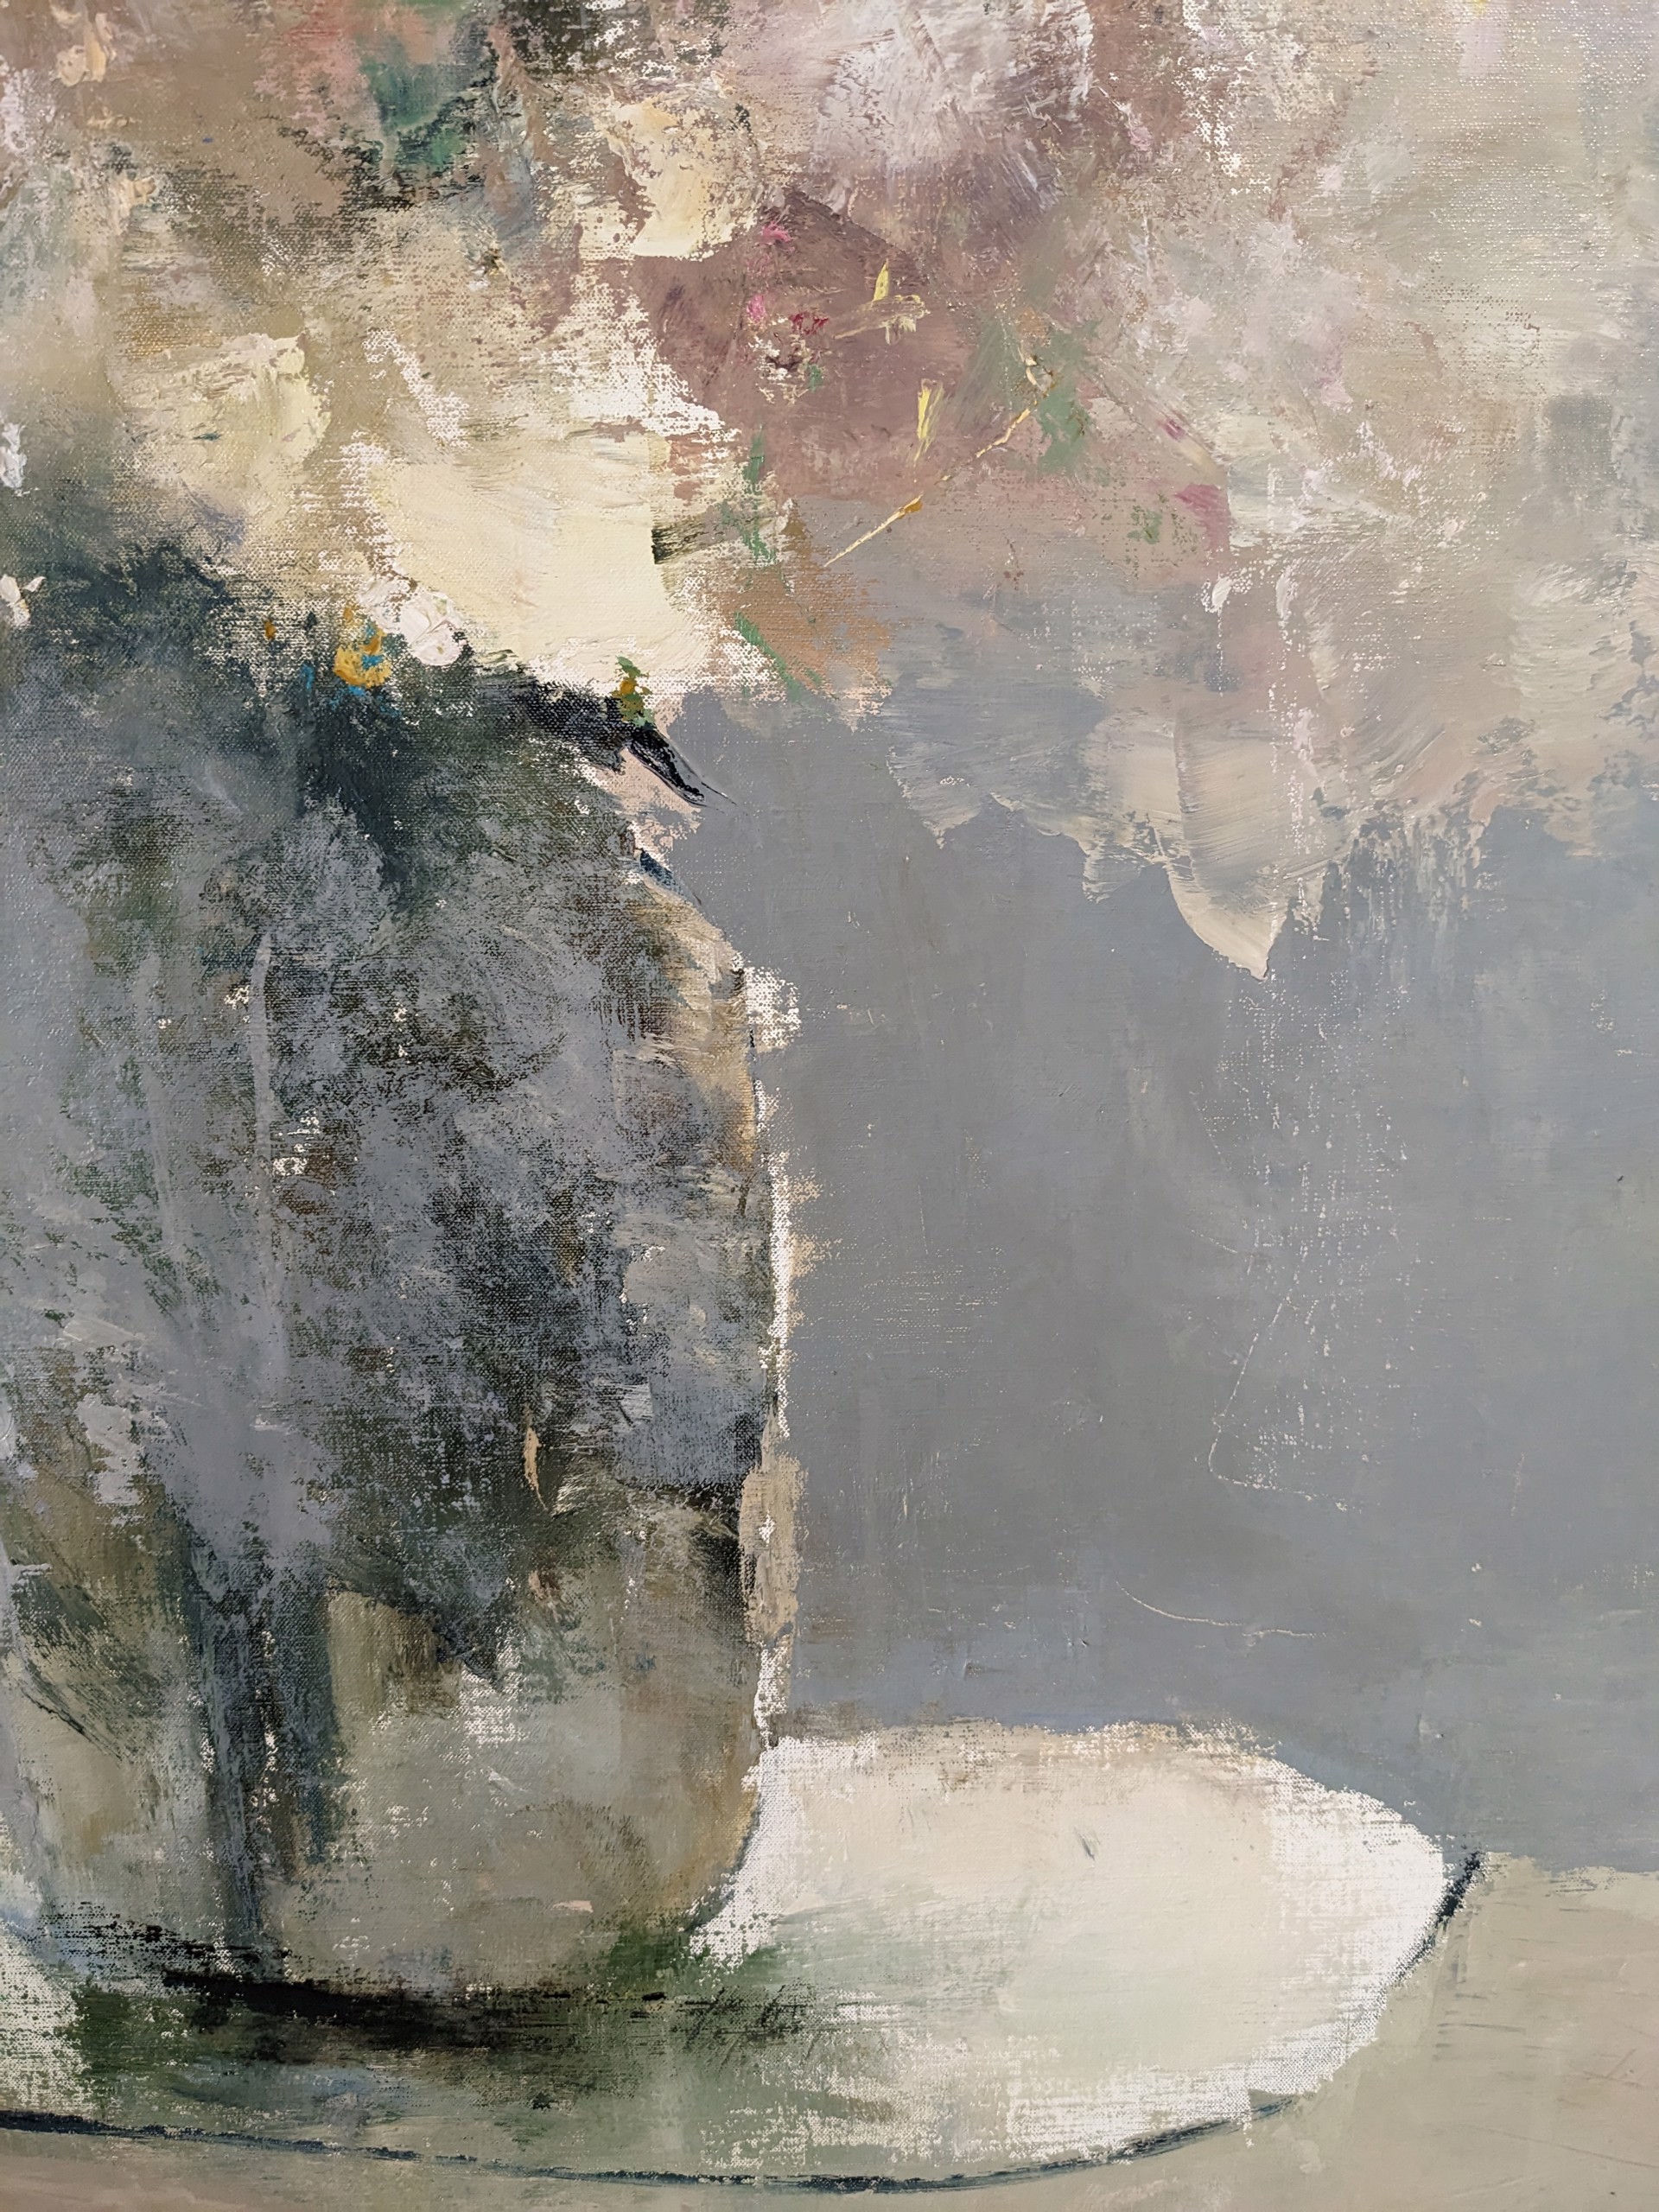 An island whom none but daisies know by France Jodoin